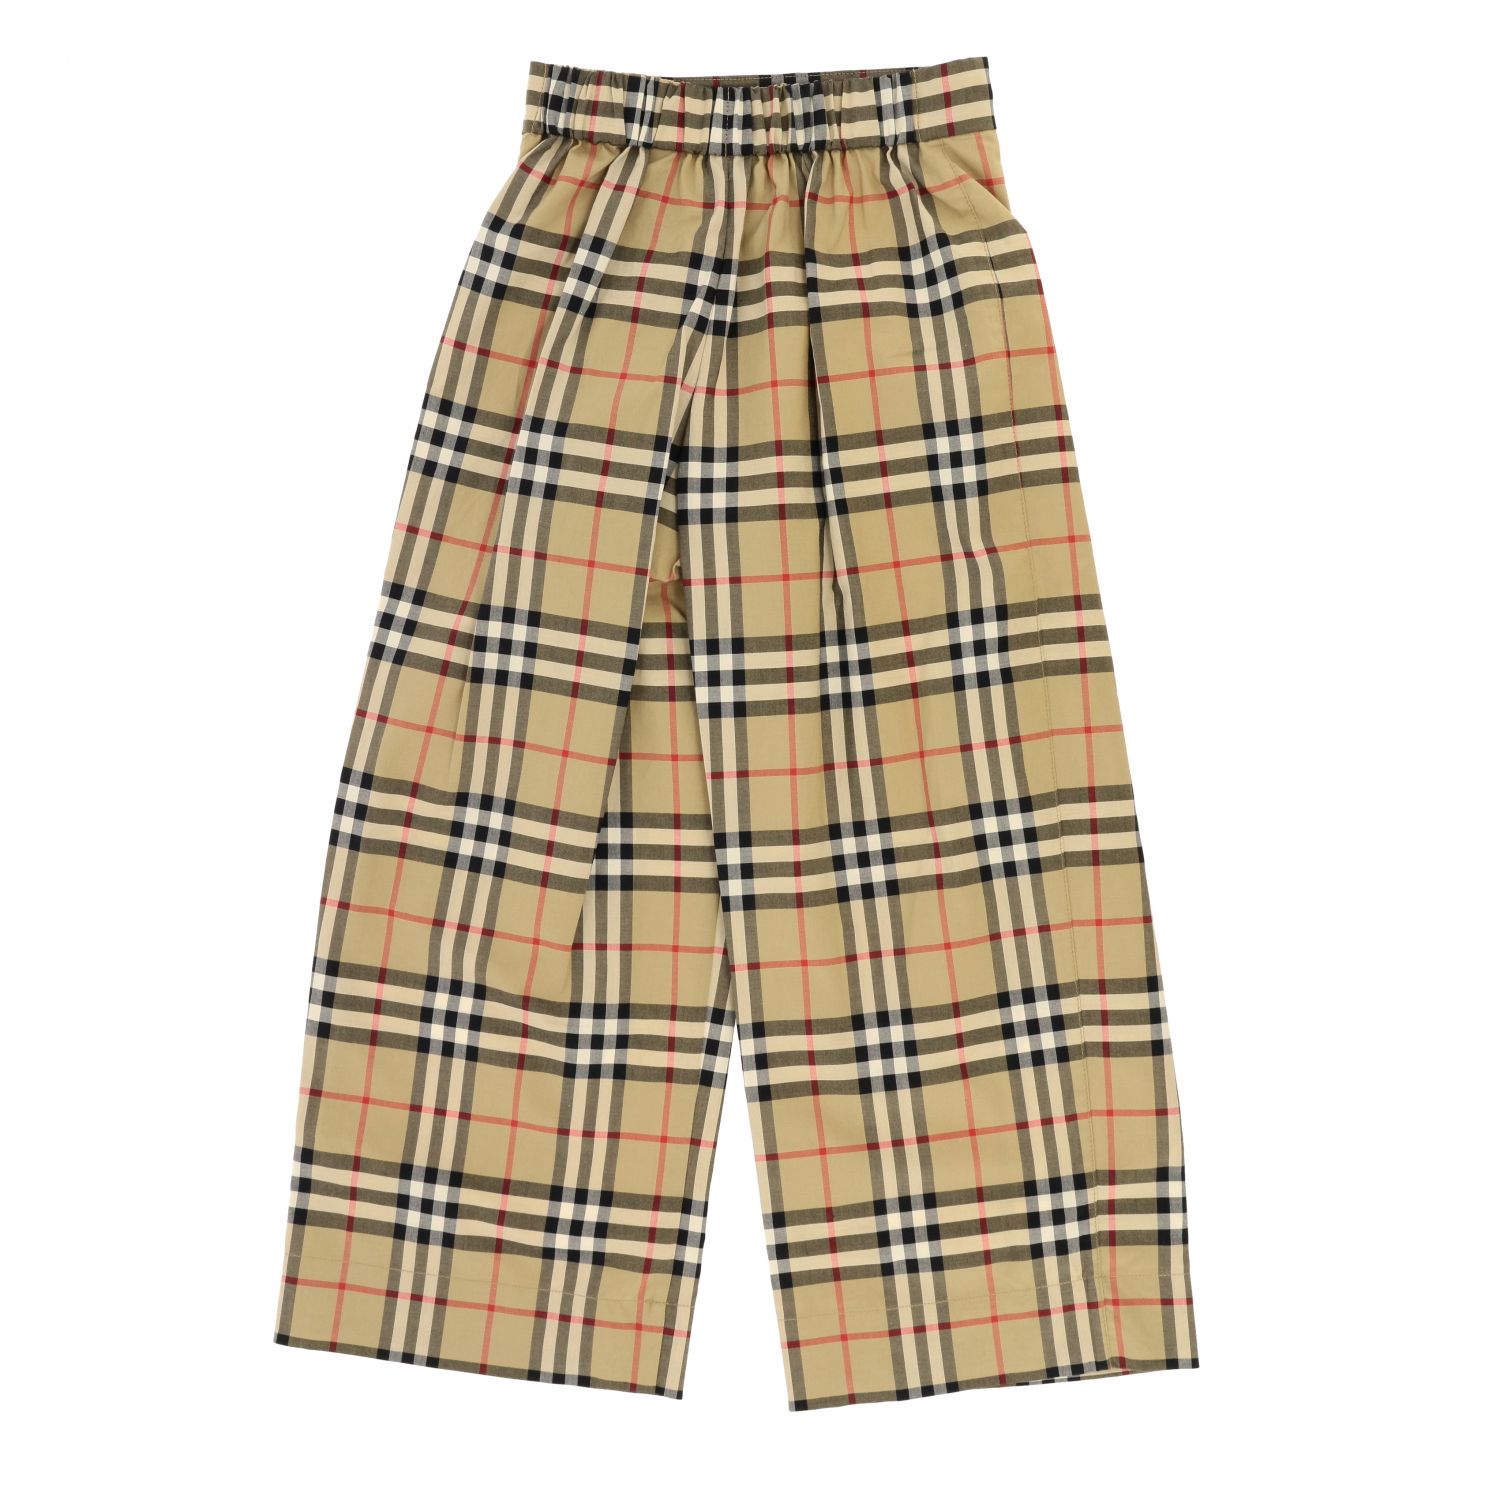 BURBERRY: check trousers with buttons - Beige | Burberry pants 8026389 ...